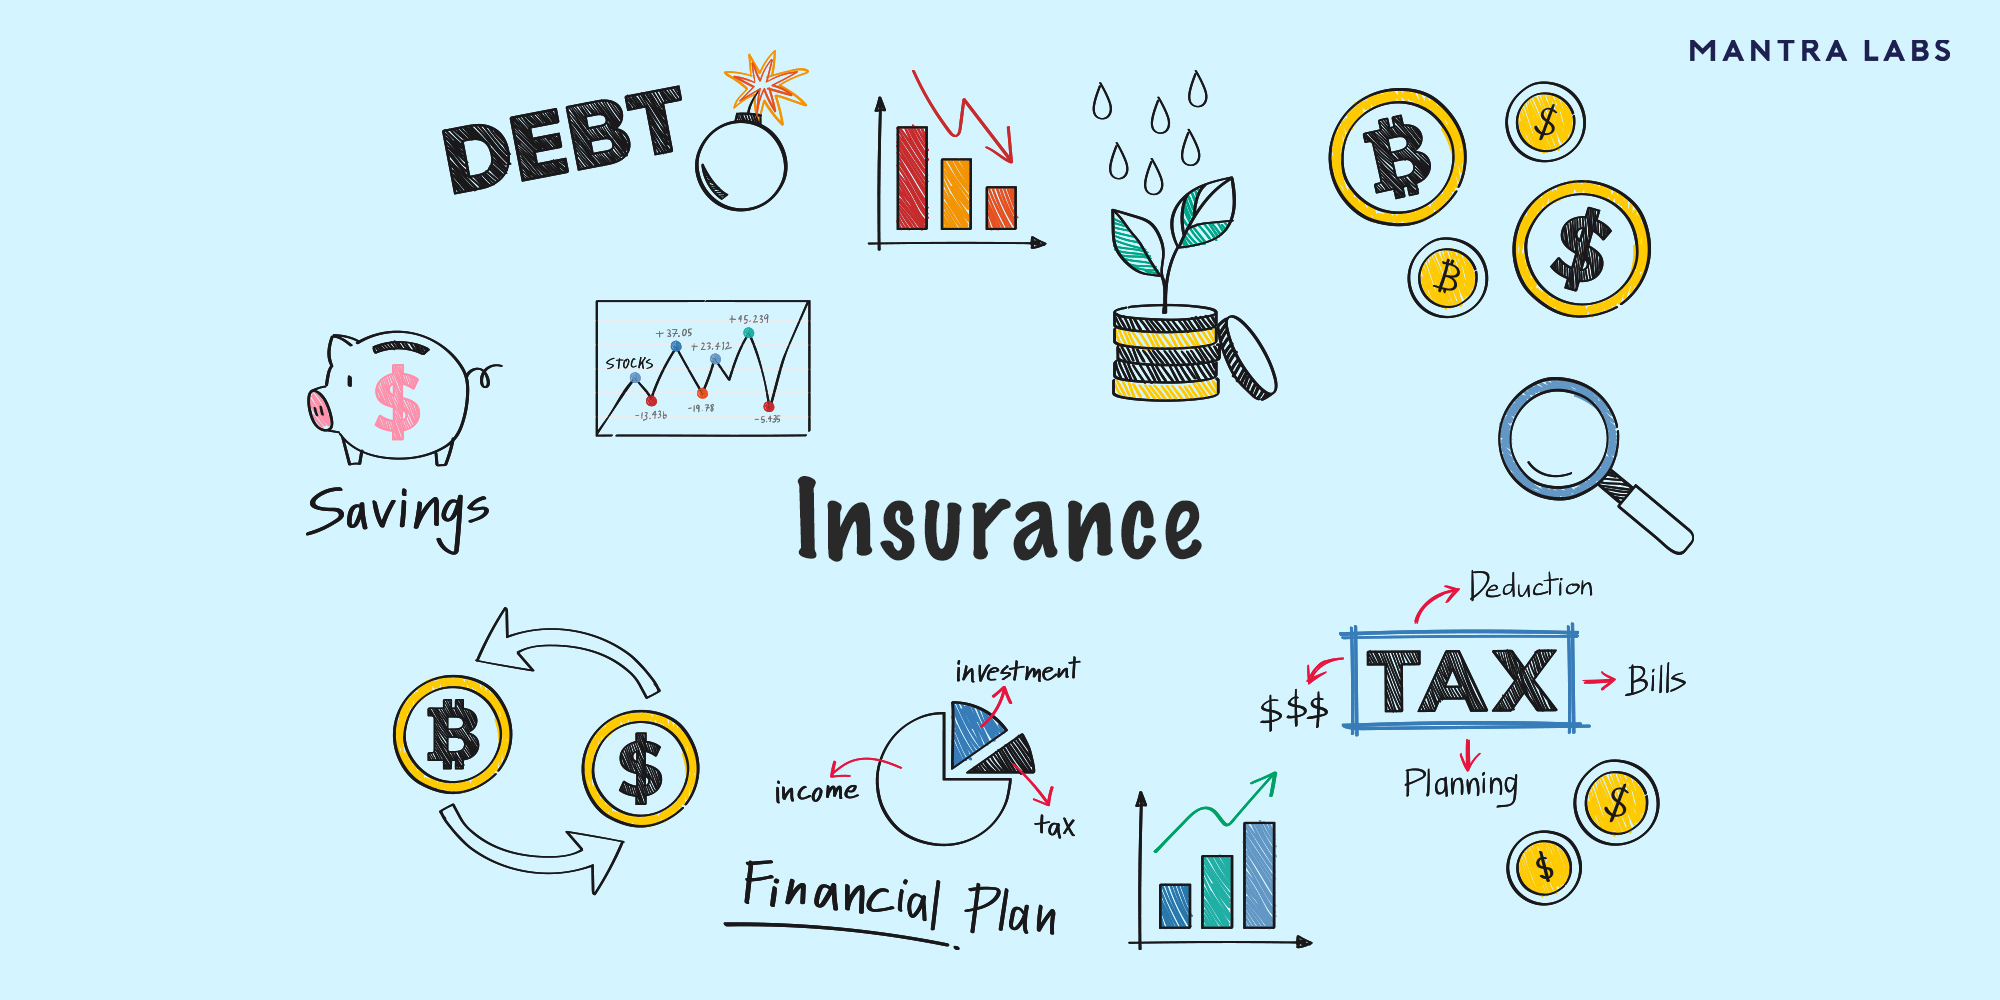 insurtech : trends and innovations in 2019 - mantra labs